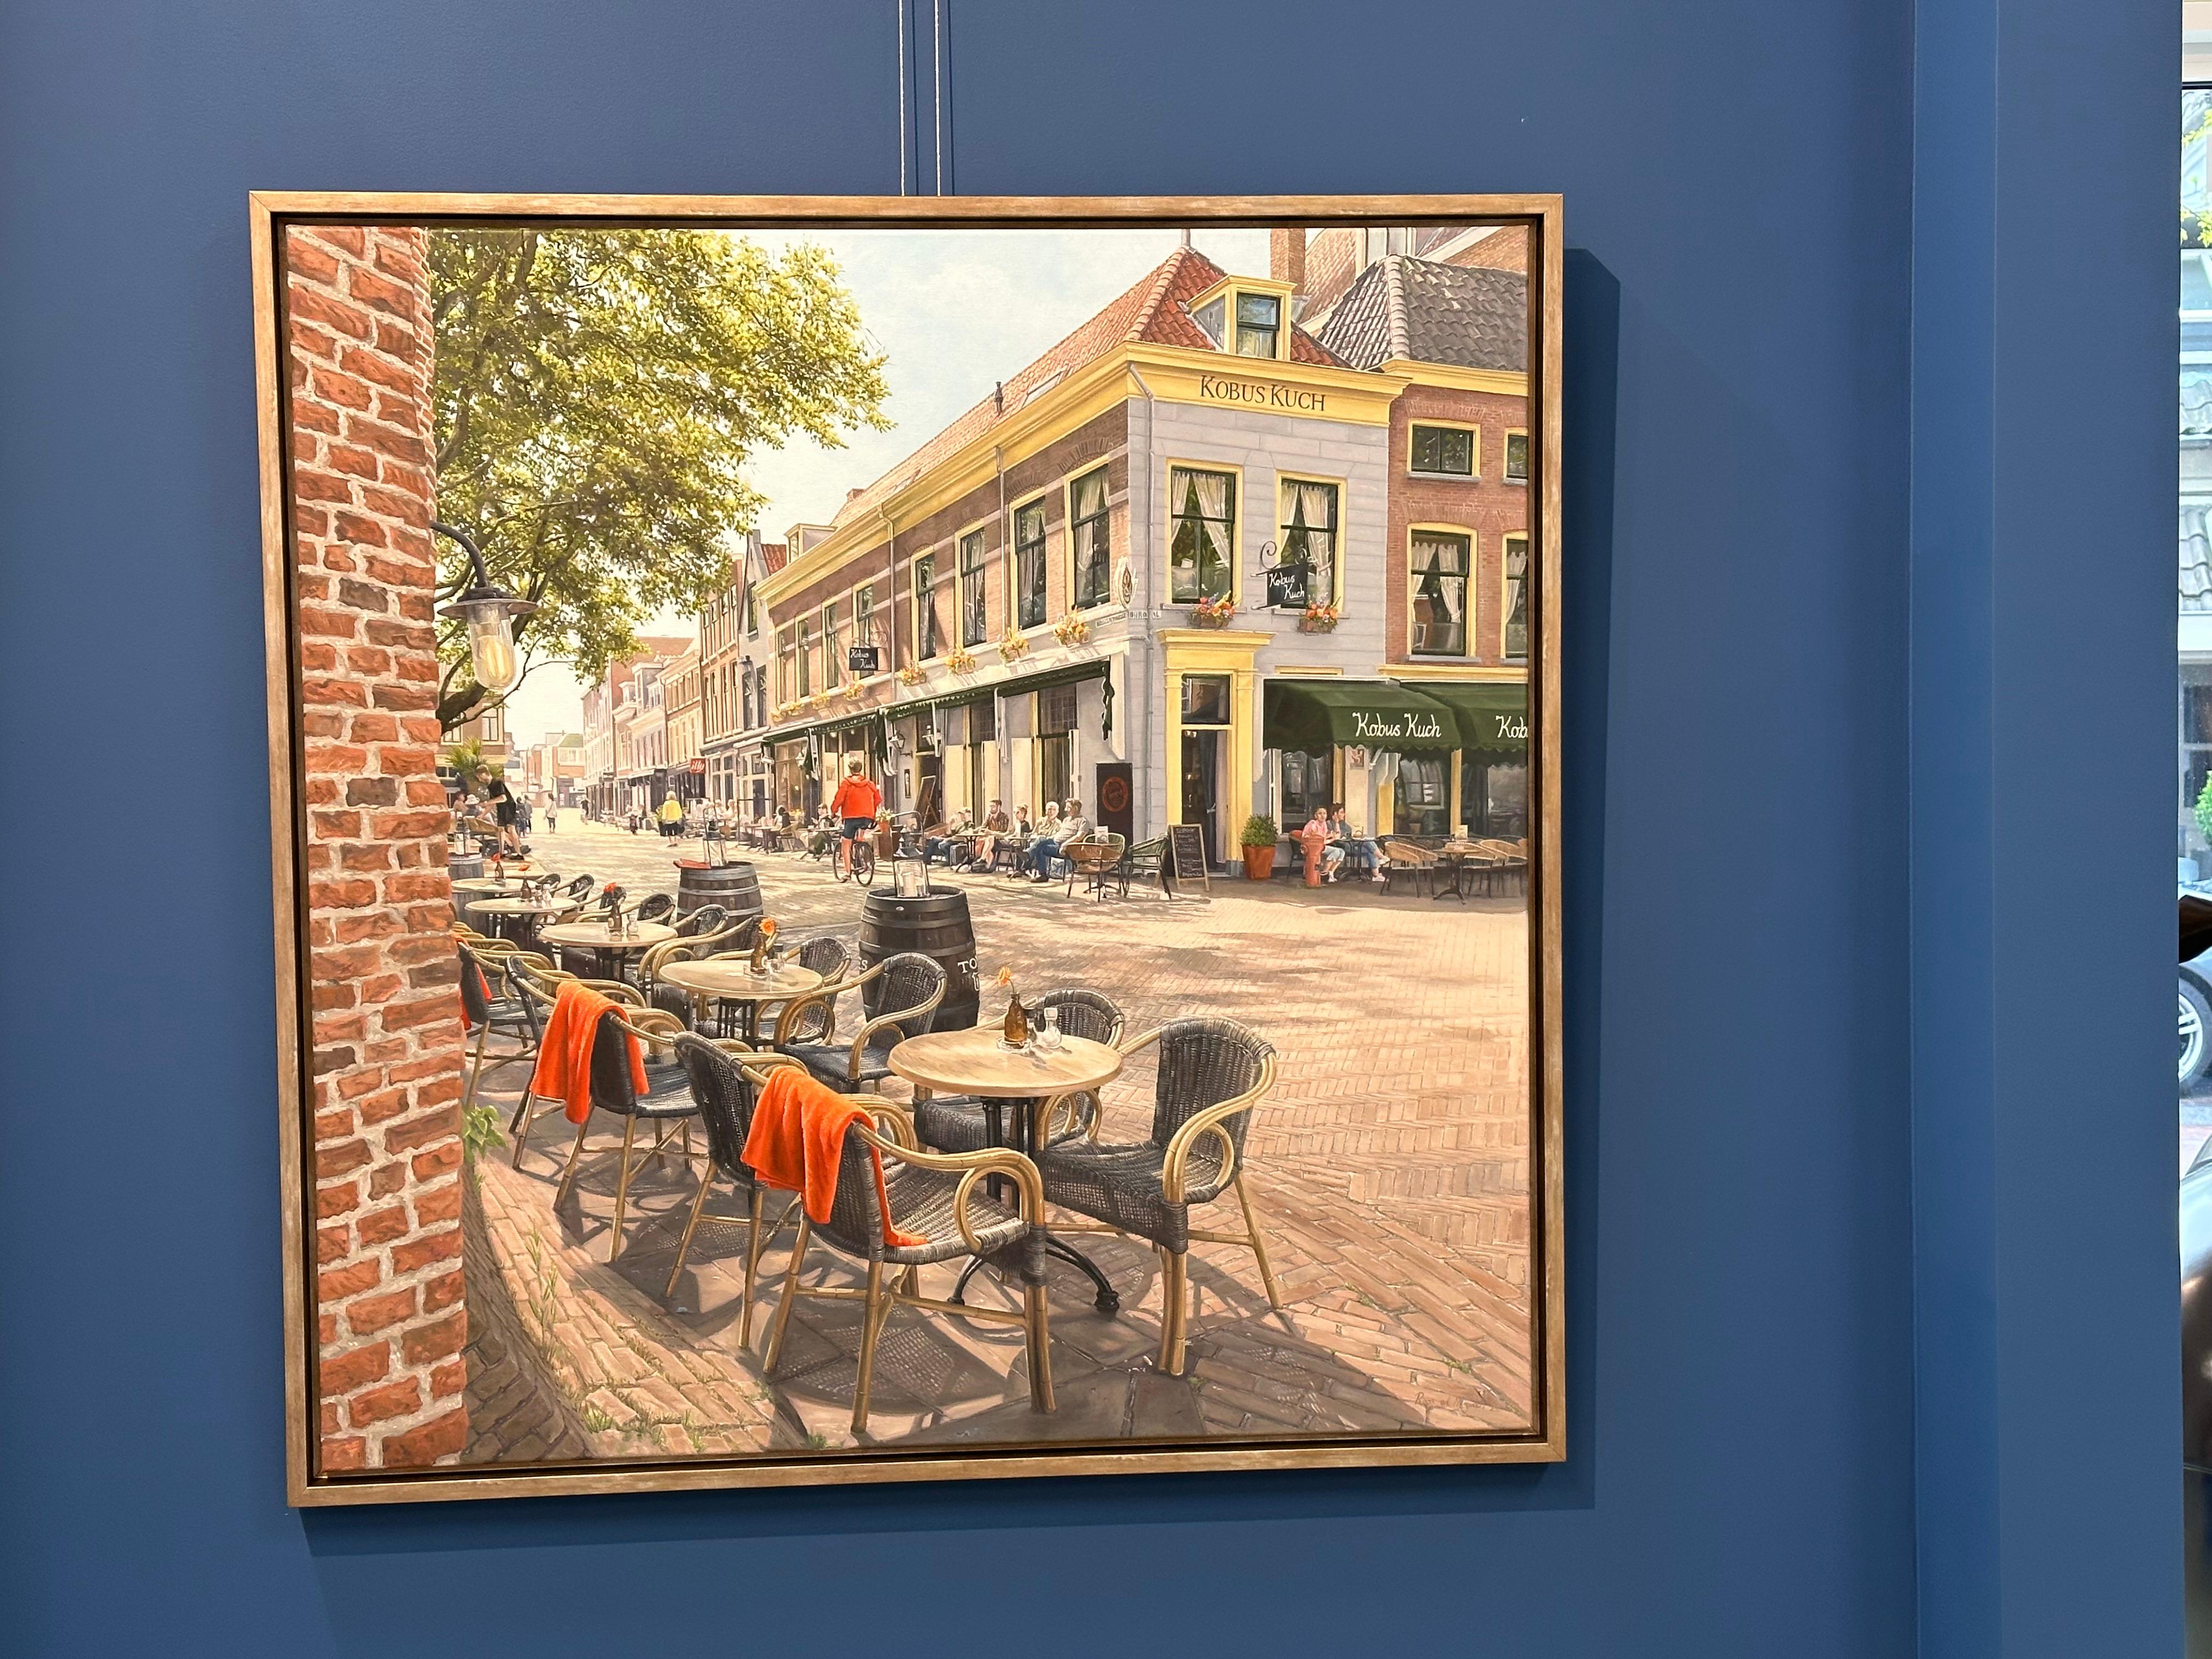 Roos van der Meijden
Kobus Kuch
100 x 100 cm ( framed 108 x 108 cm, frame is included in price )
Acrylic on canvas

Dutch artist Roos van der Meijden is famous because of her cityscapes. In her very realistic way of paintings she is fond of all